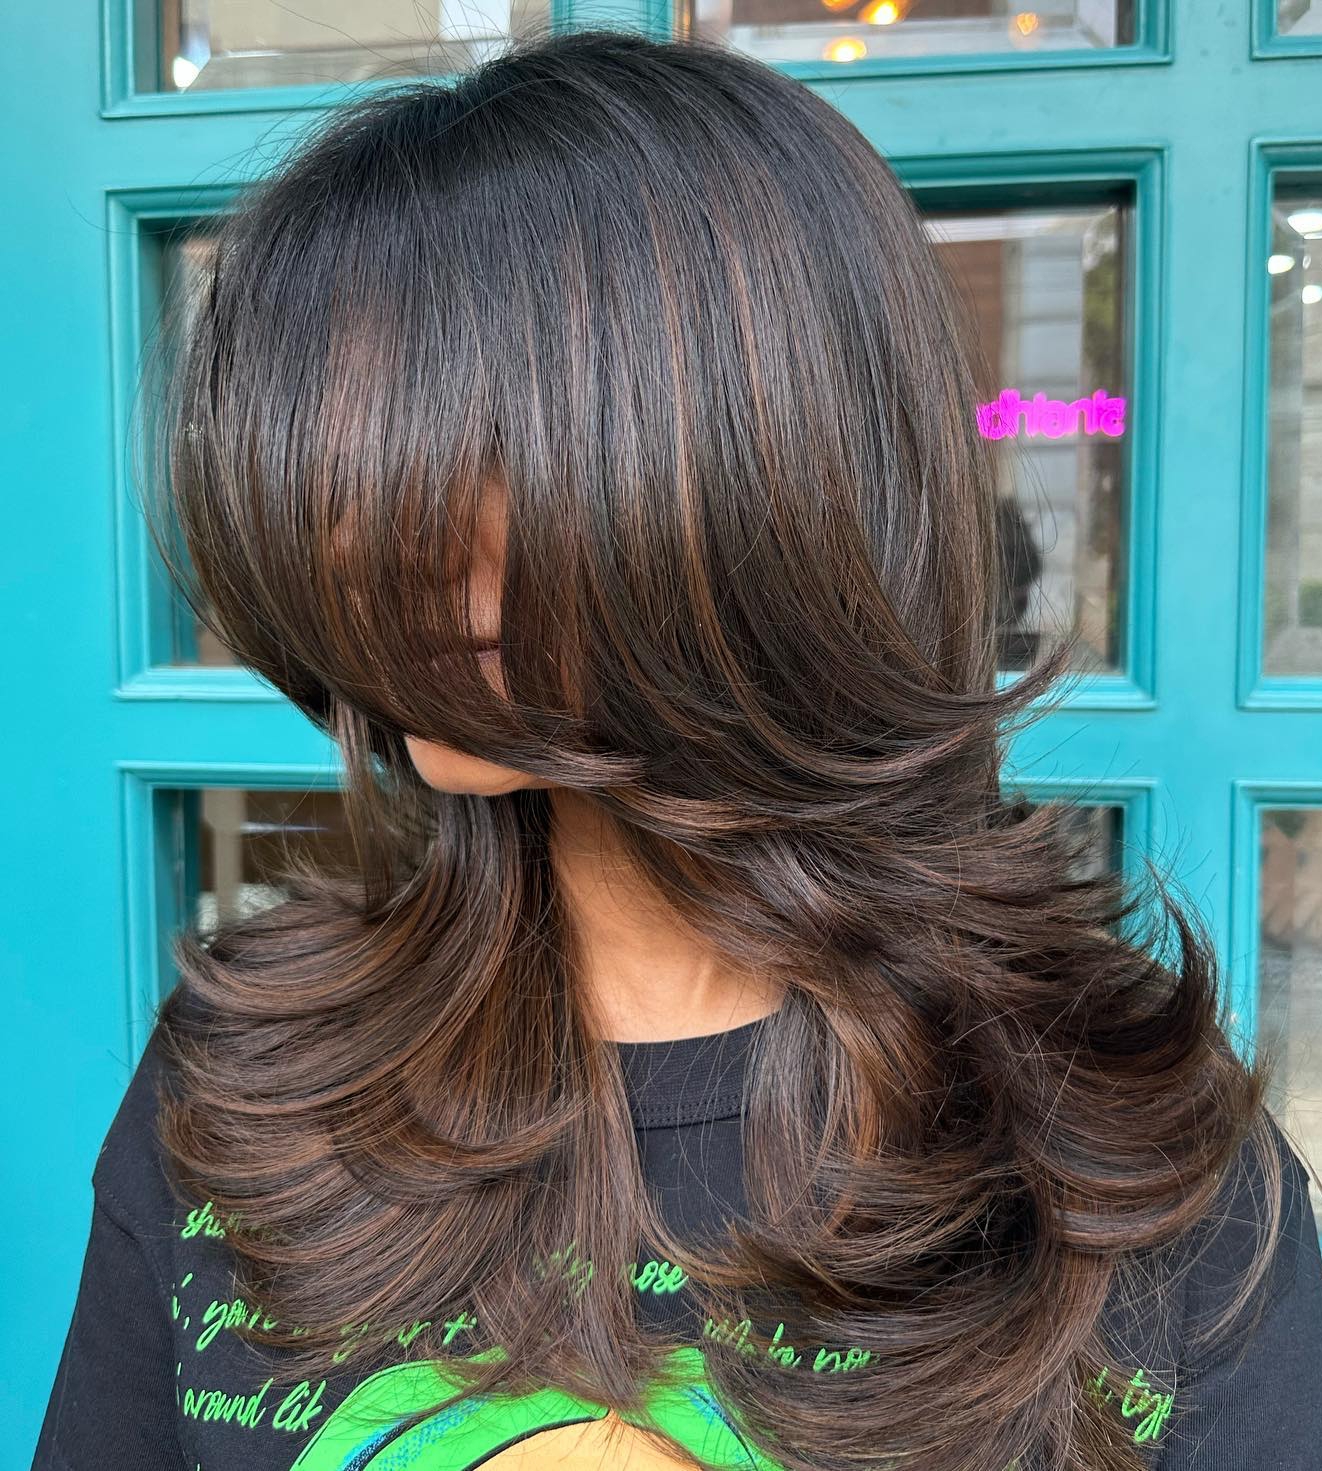 Long Brown Feathered Hairstyle with Highlights